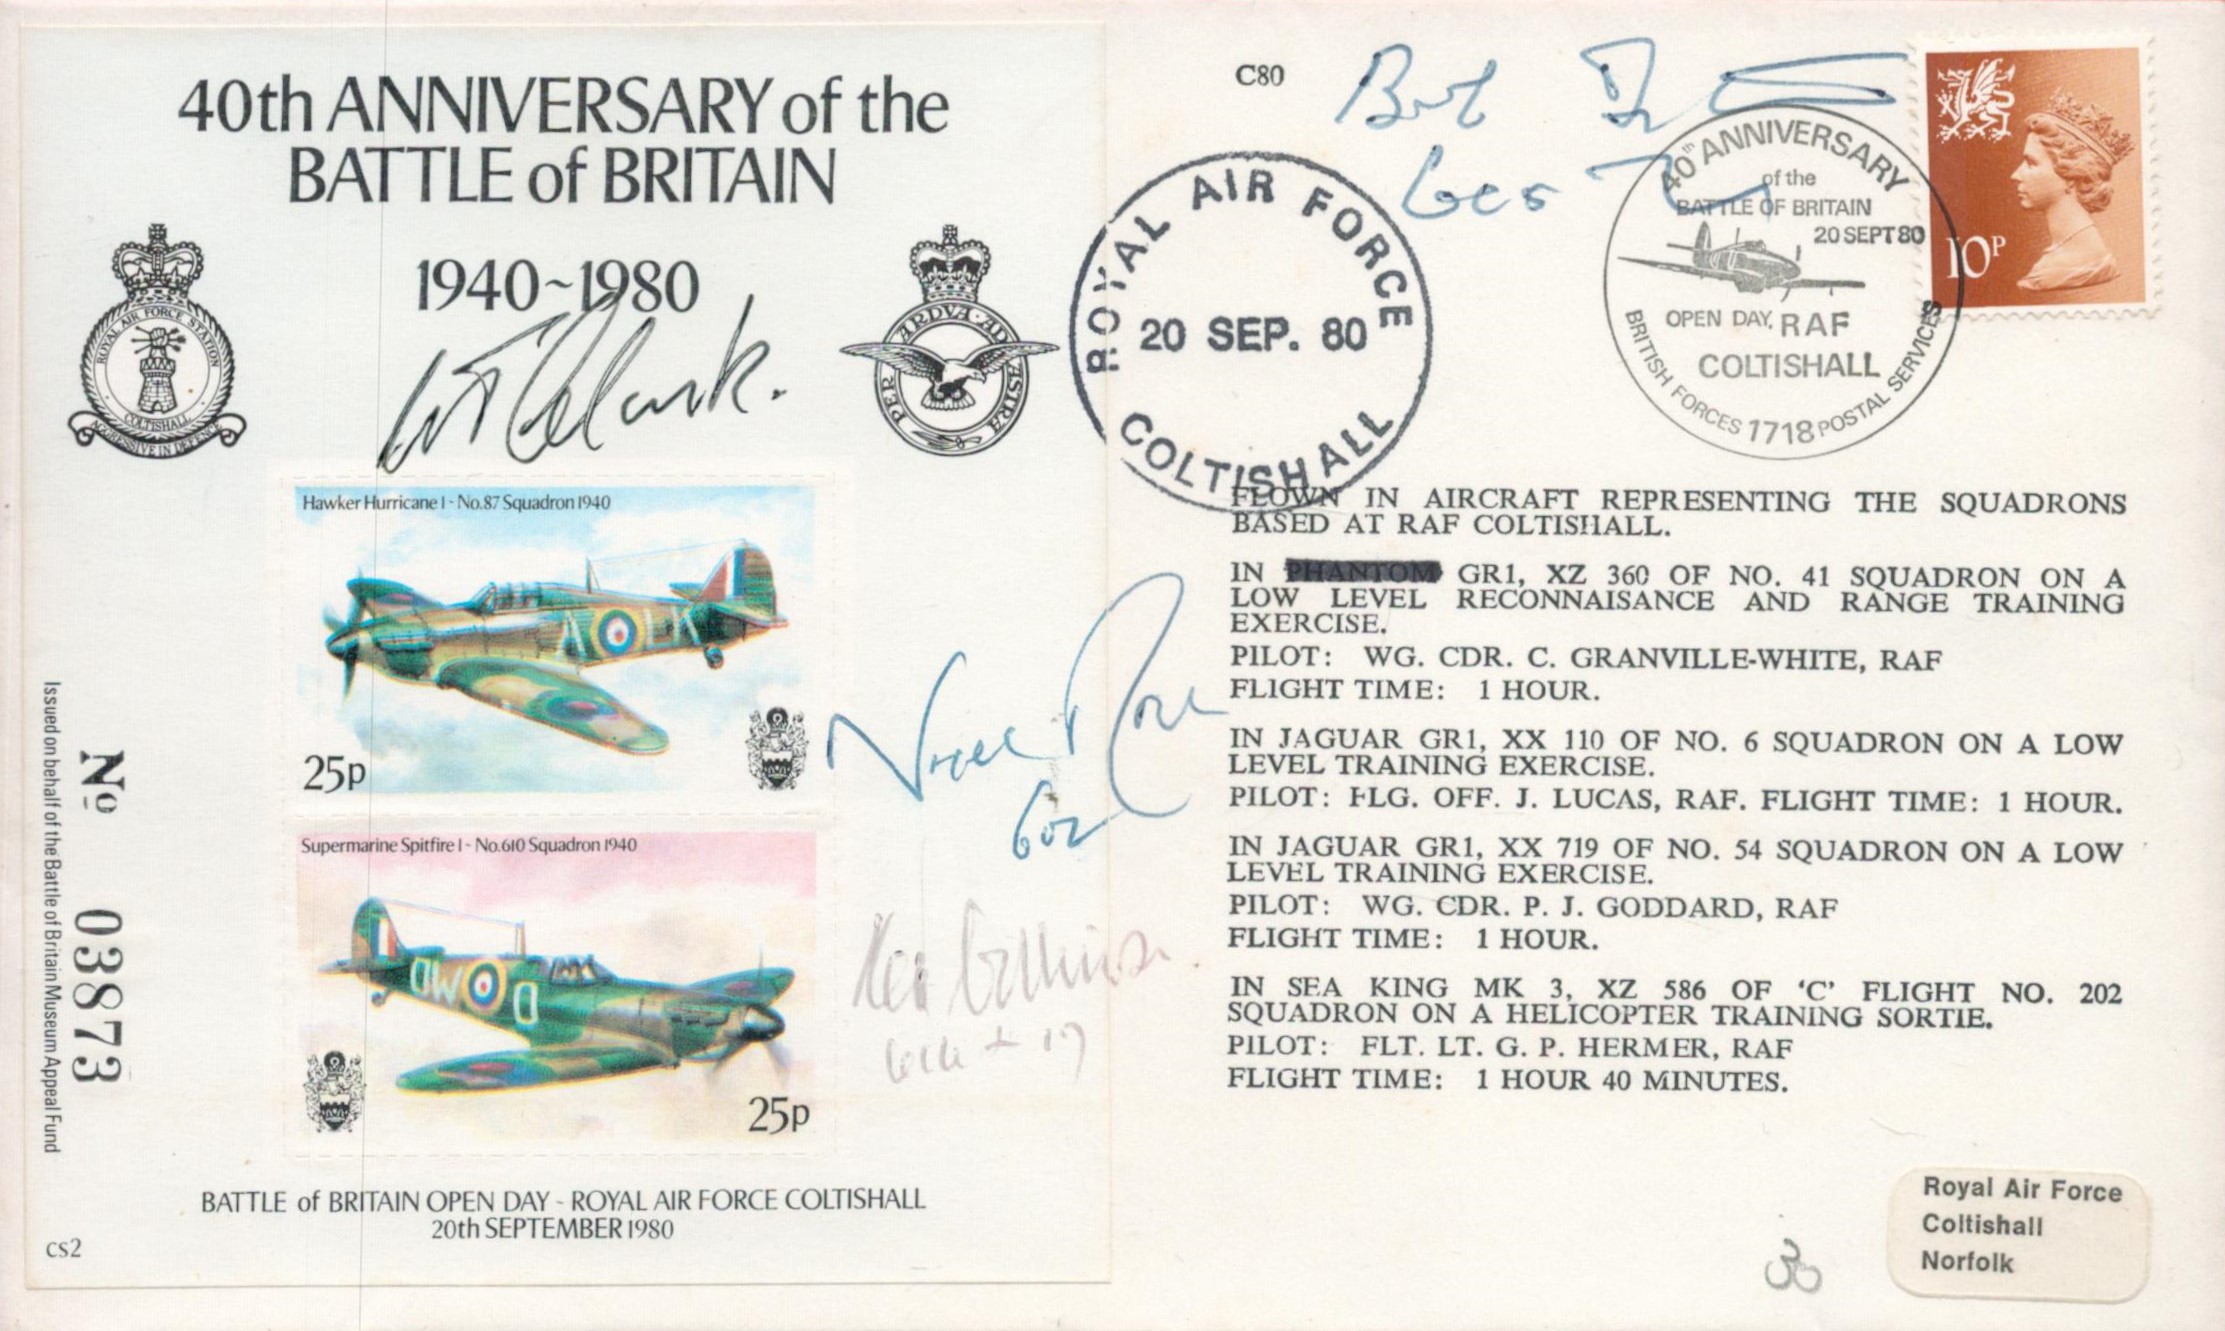 Nigel Rose, WT Clark, Ken Wilkinson, and Bob Foster Signed 40th Anniversary of the Battle of Britain